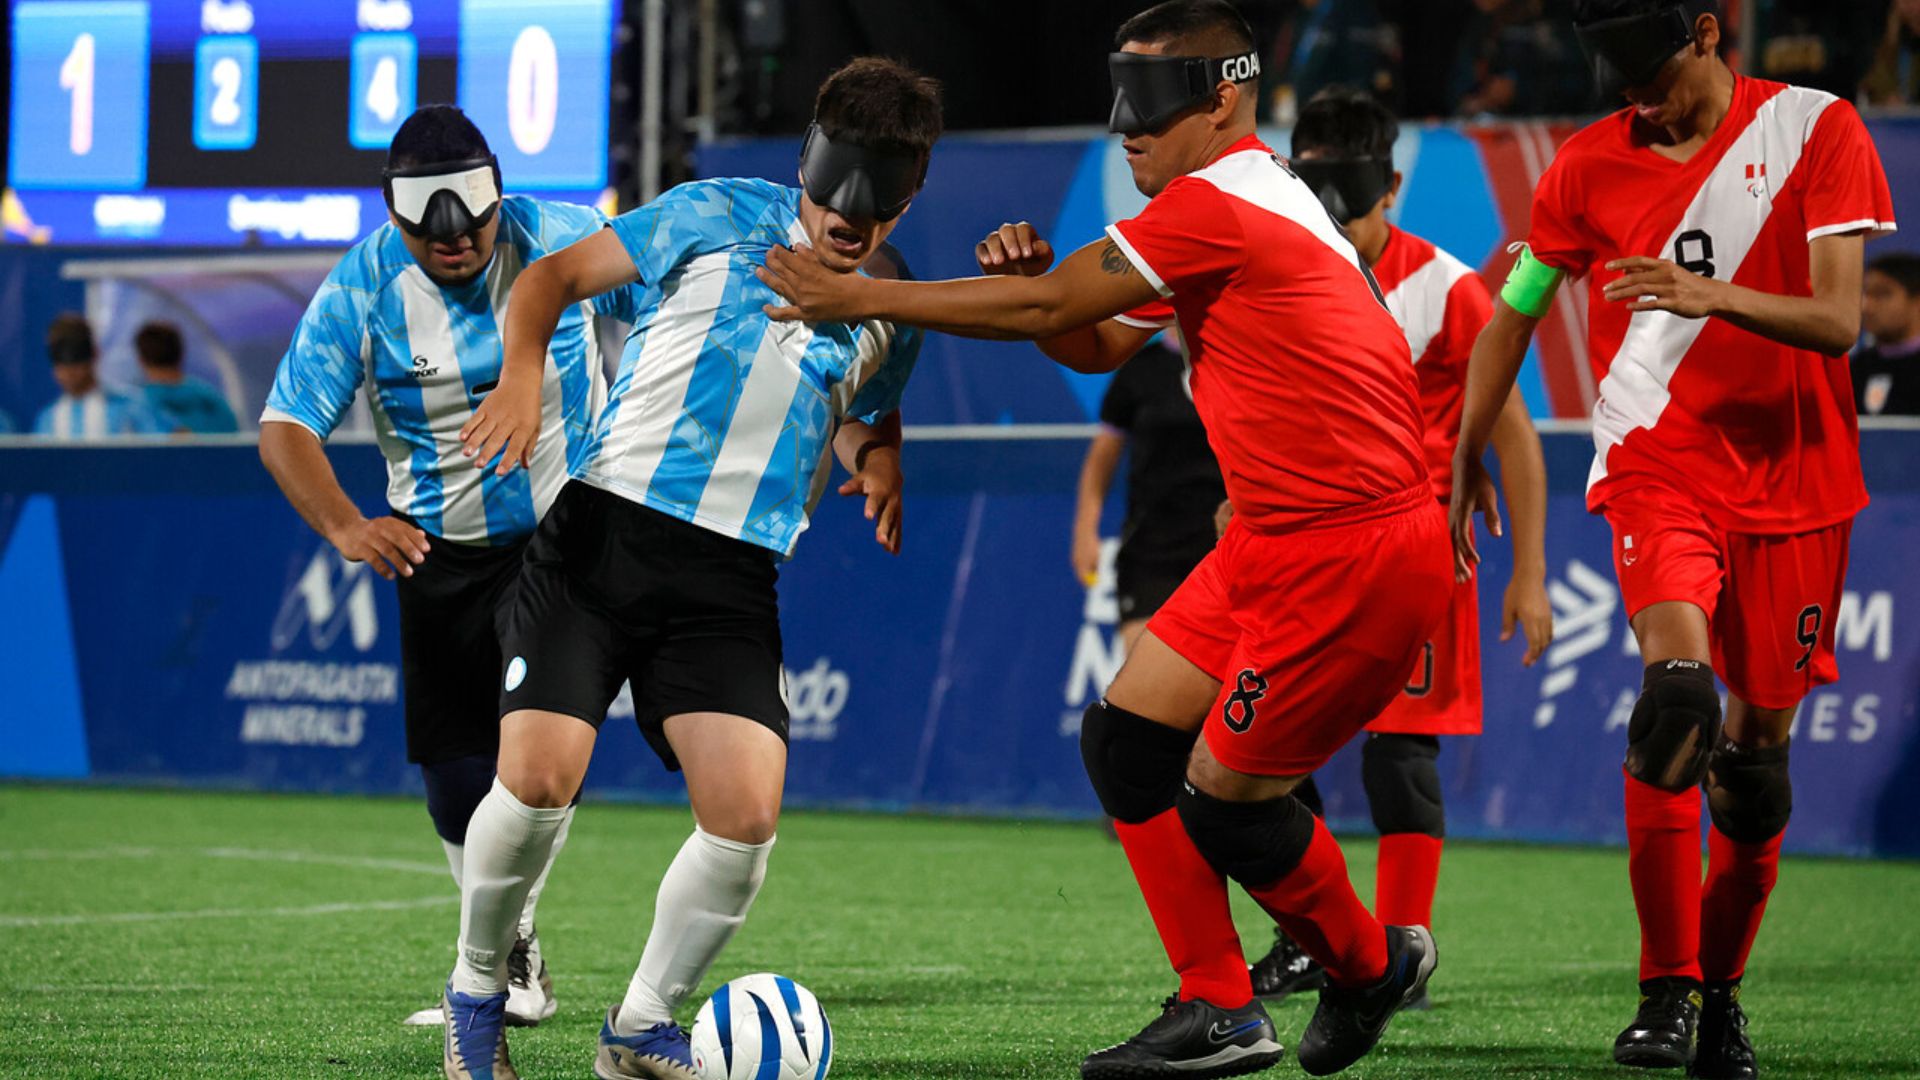 Blind Football: Peru, Chile's next opponent, loses to Argentina